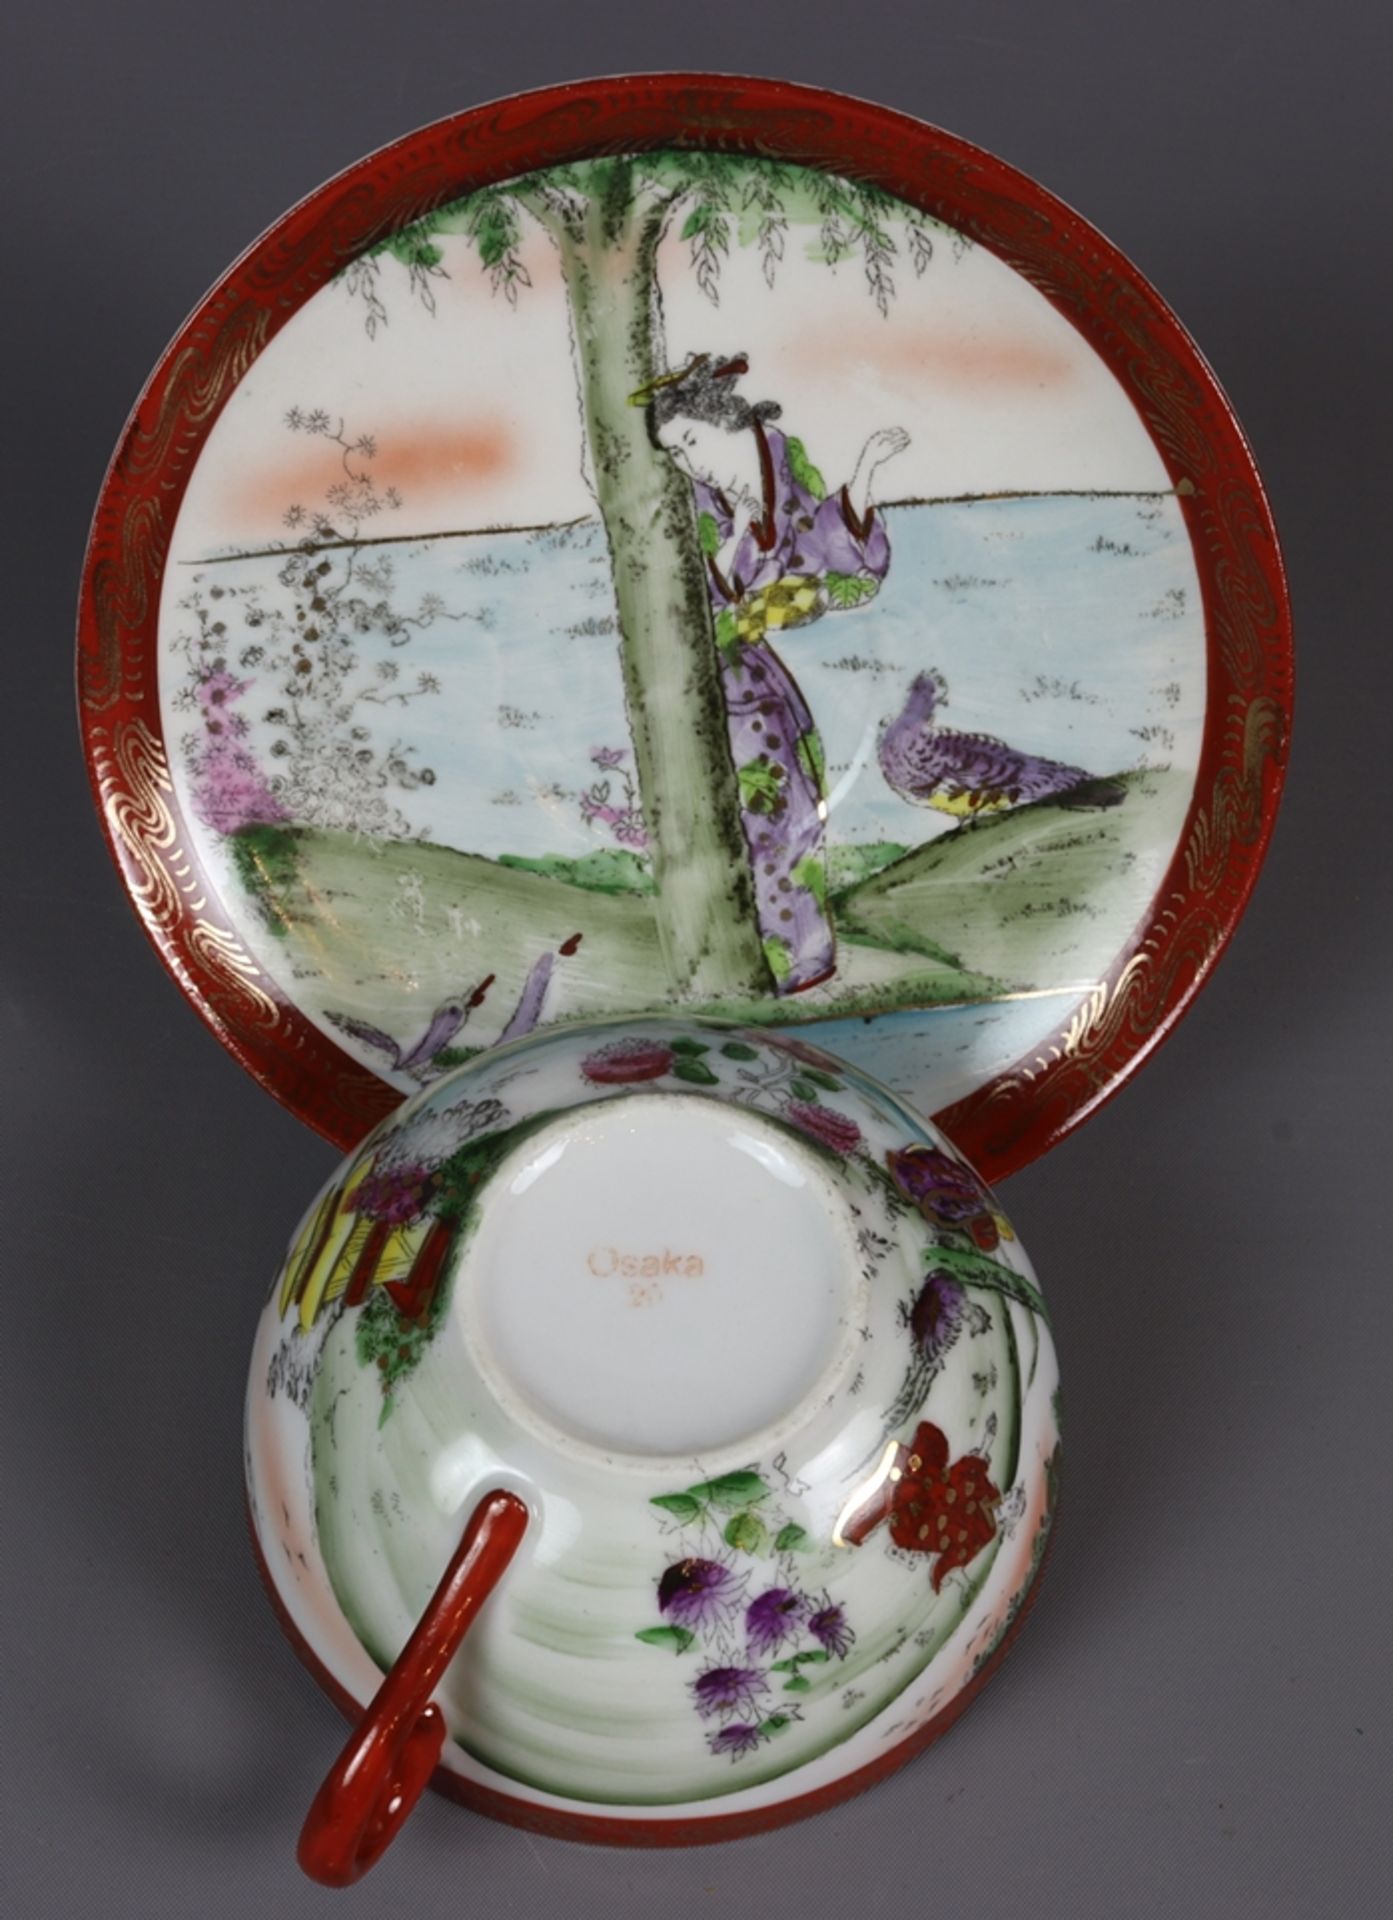 Lot of Asian porcelain, first half of the 20th century, China - Image 7 of 9